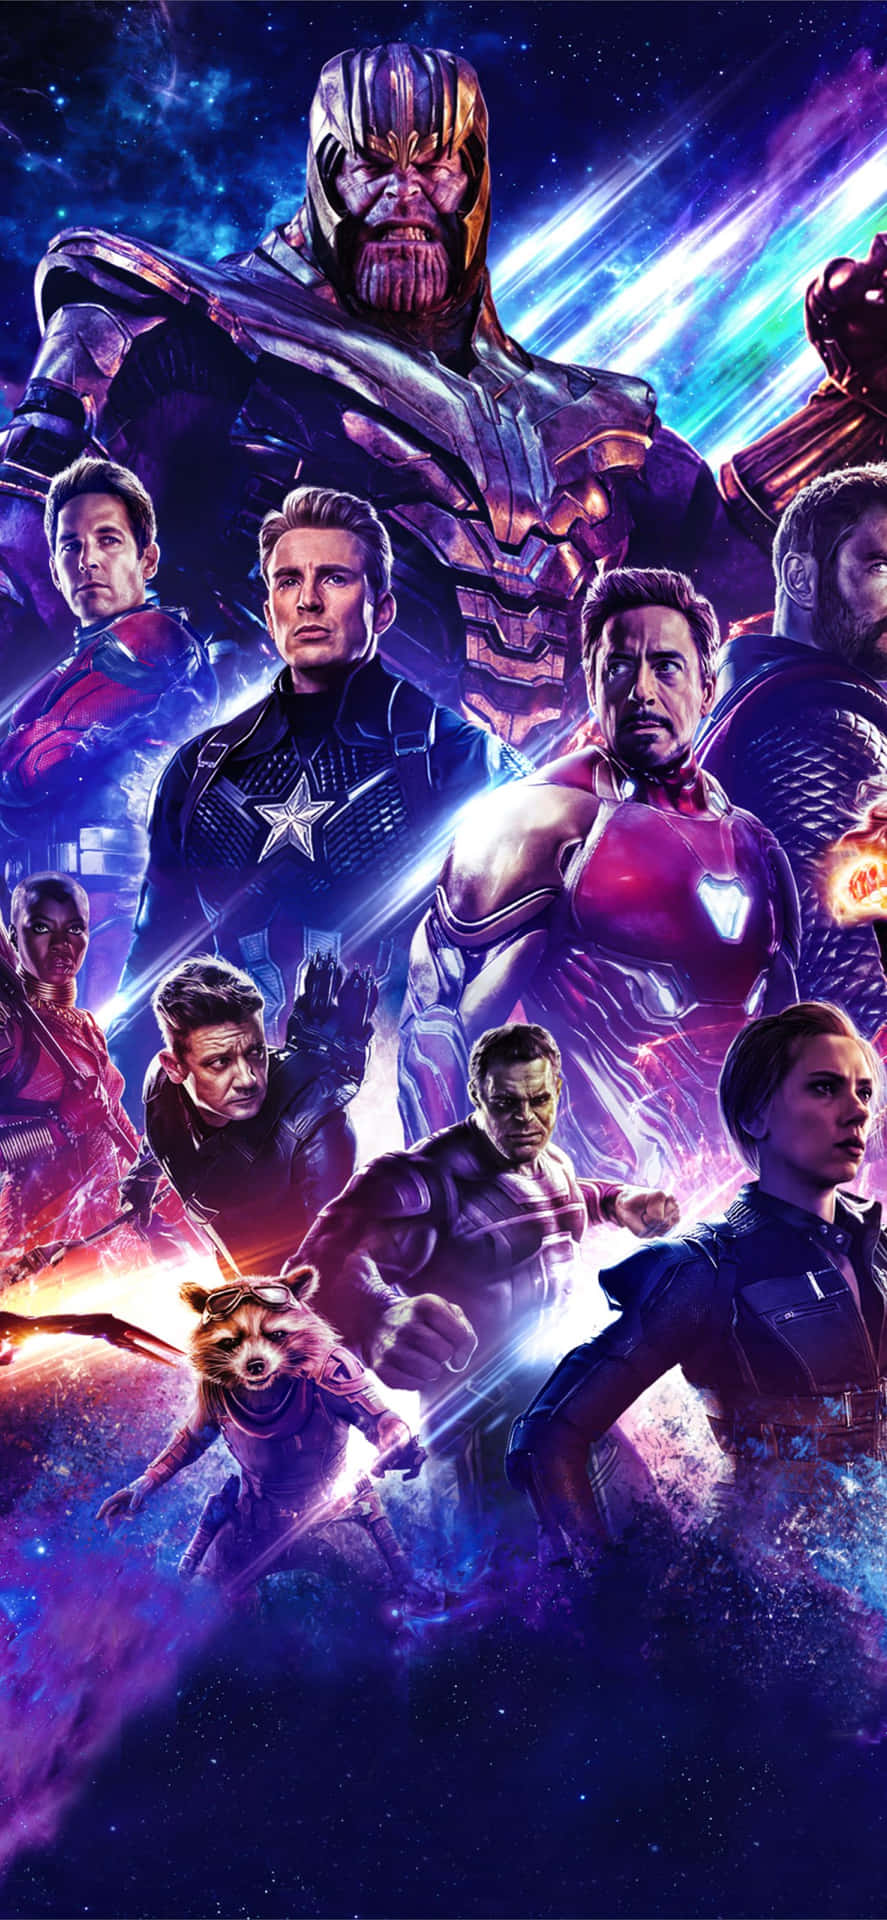 Get your new iPhone with the Avengers Endgame theme now Wallpaper